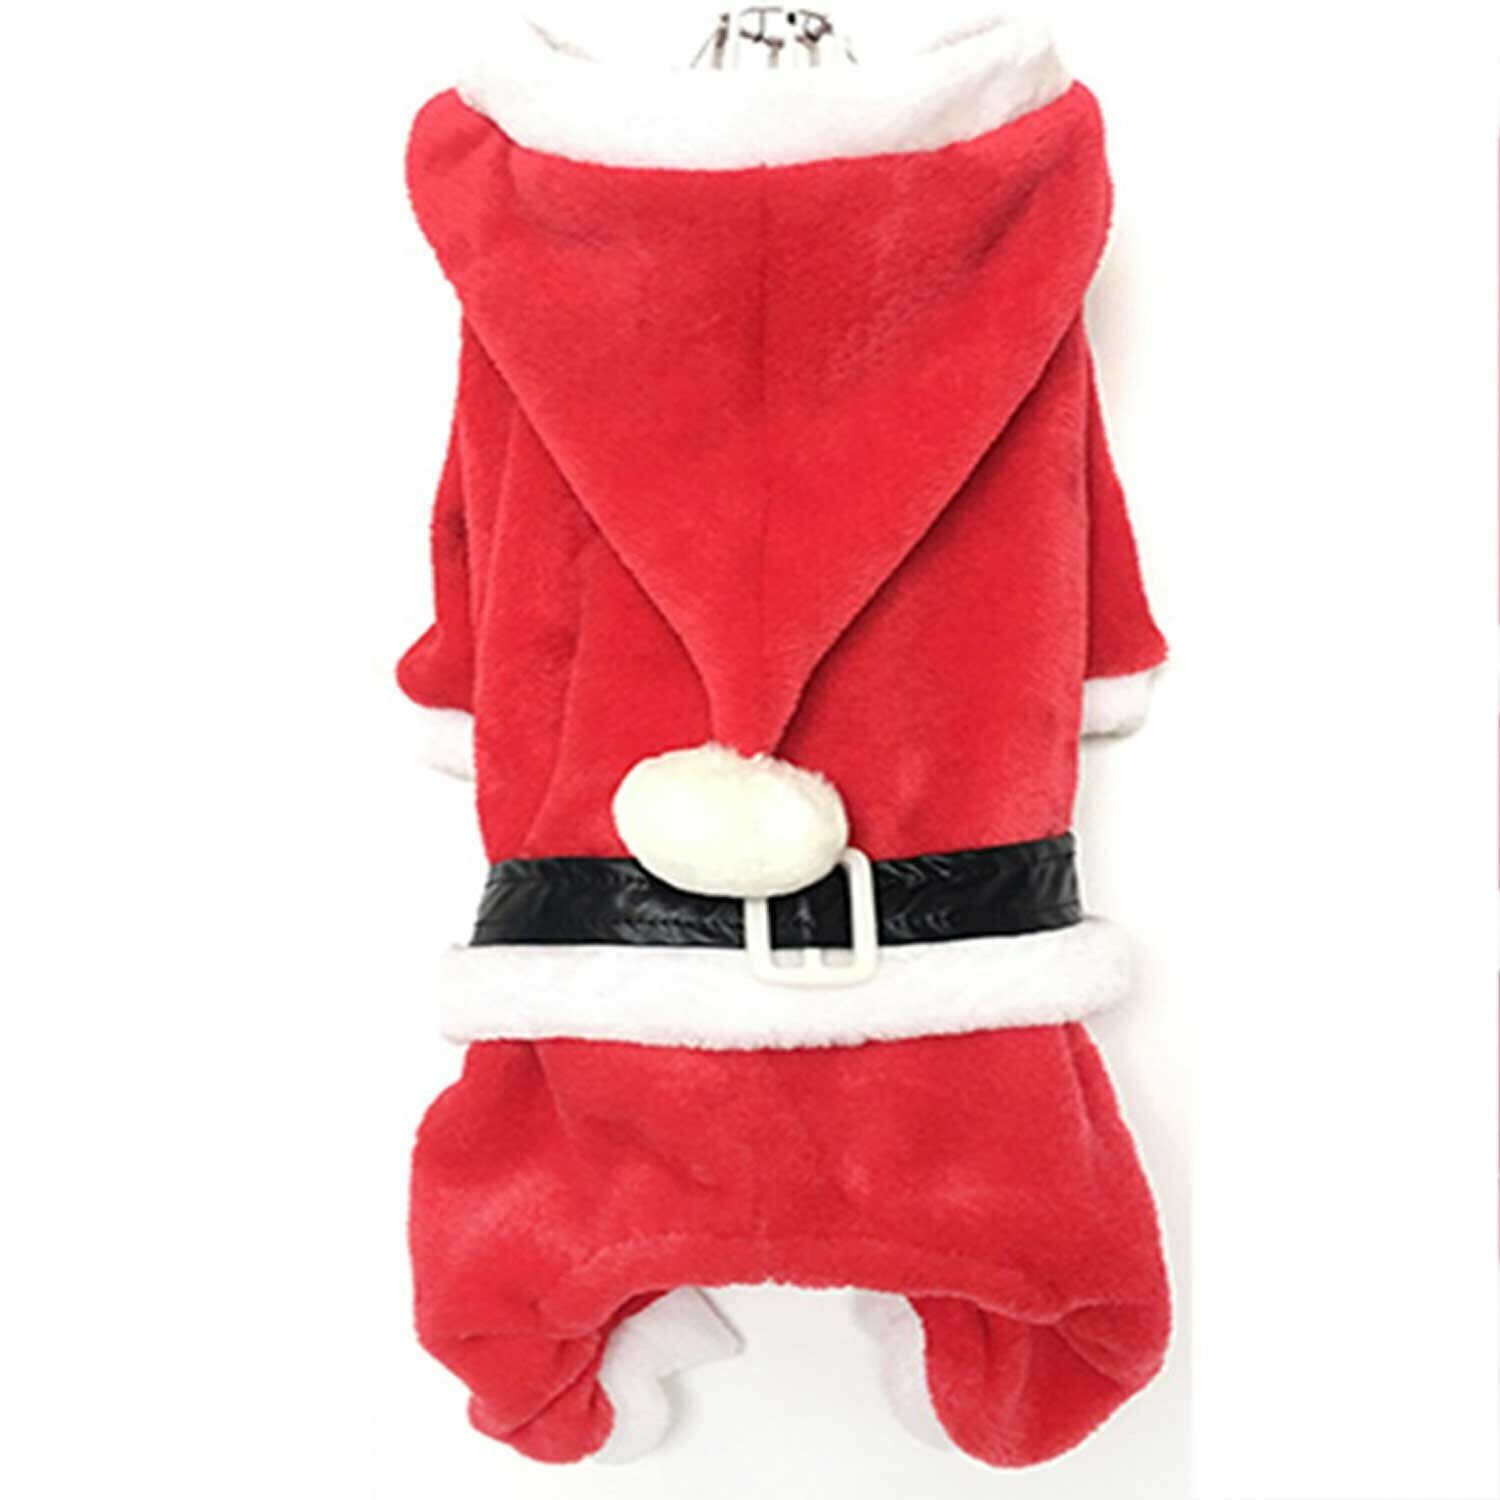 Christmas coat for dogs - Nikolaus costume for dogs